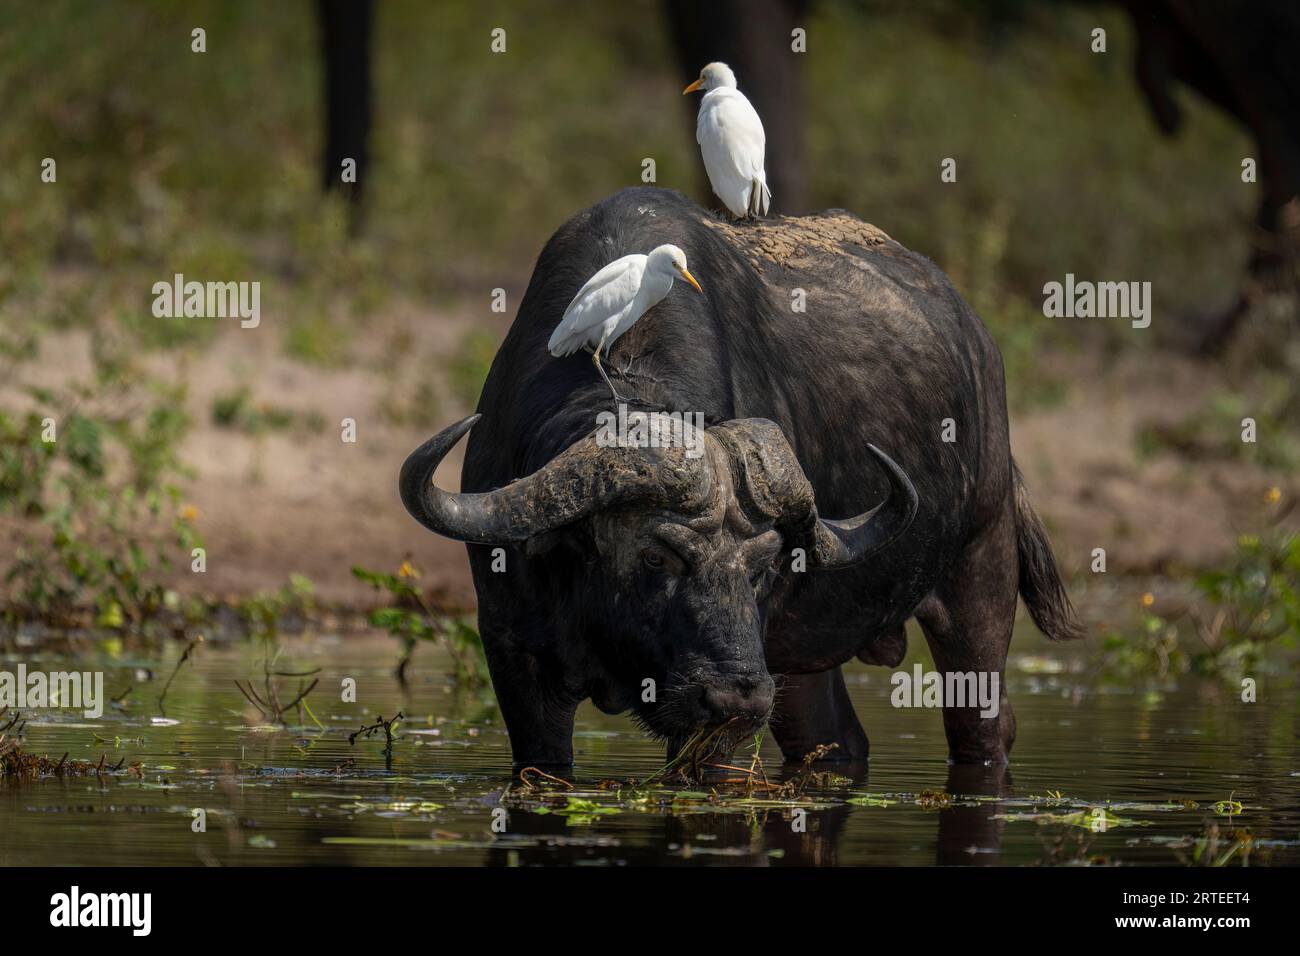 Portrait of a Cape Buffalo (Syncerus caffer) drinking from river carrying two cattle egrets (Bubulcus ibis) on its back in Chobe National Park Stock Photo